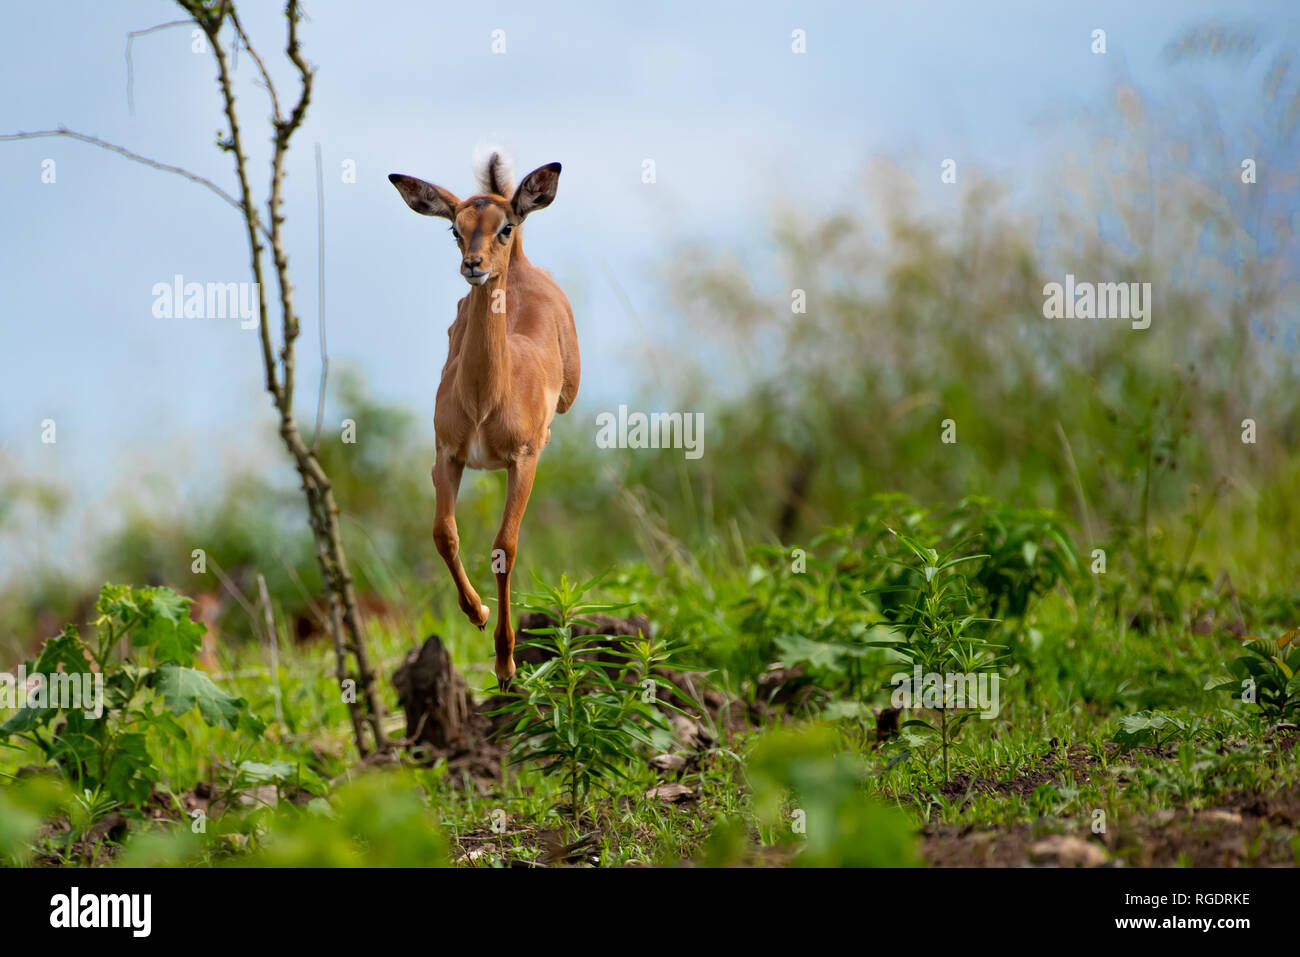 Full of the joys of life, an impala youngster runs, prances and leaps into the air with unrestrained enthusism. Stock Photo